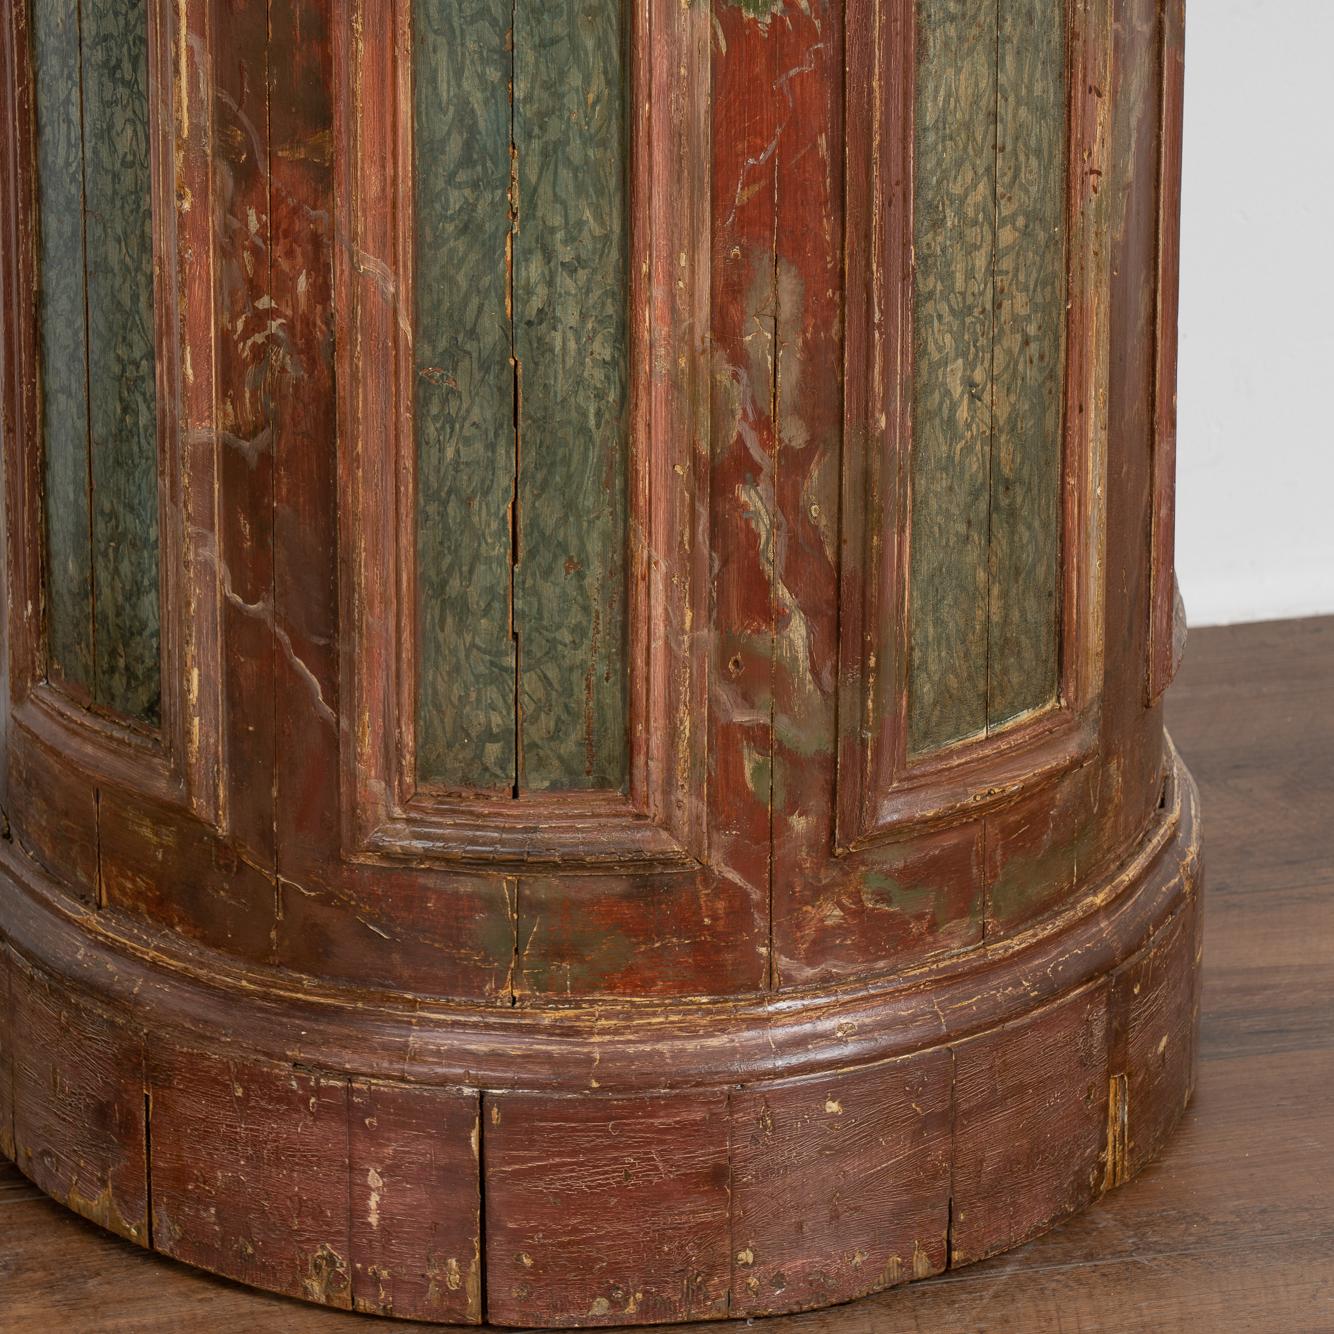 19th Century Antique Red Painted Wood Display Pedestal from Sweden, circa 1840-1860 For Sale